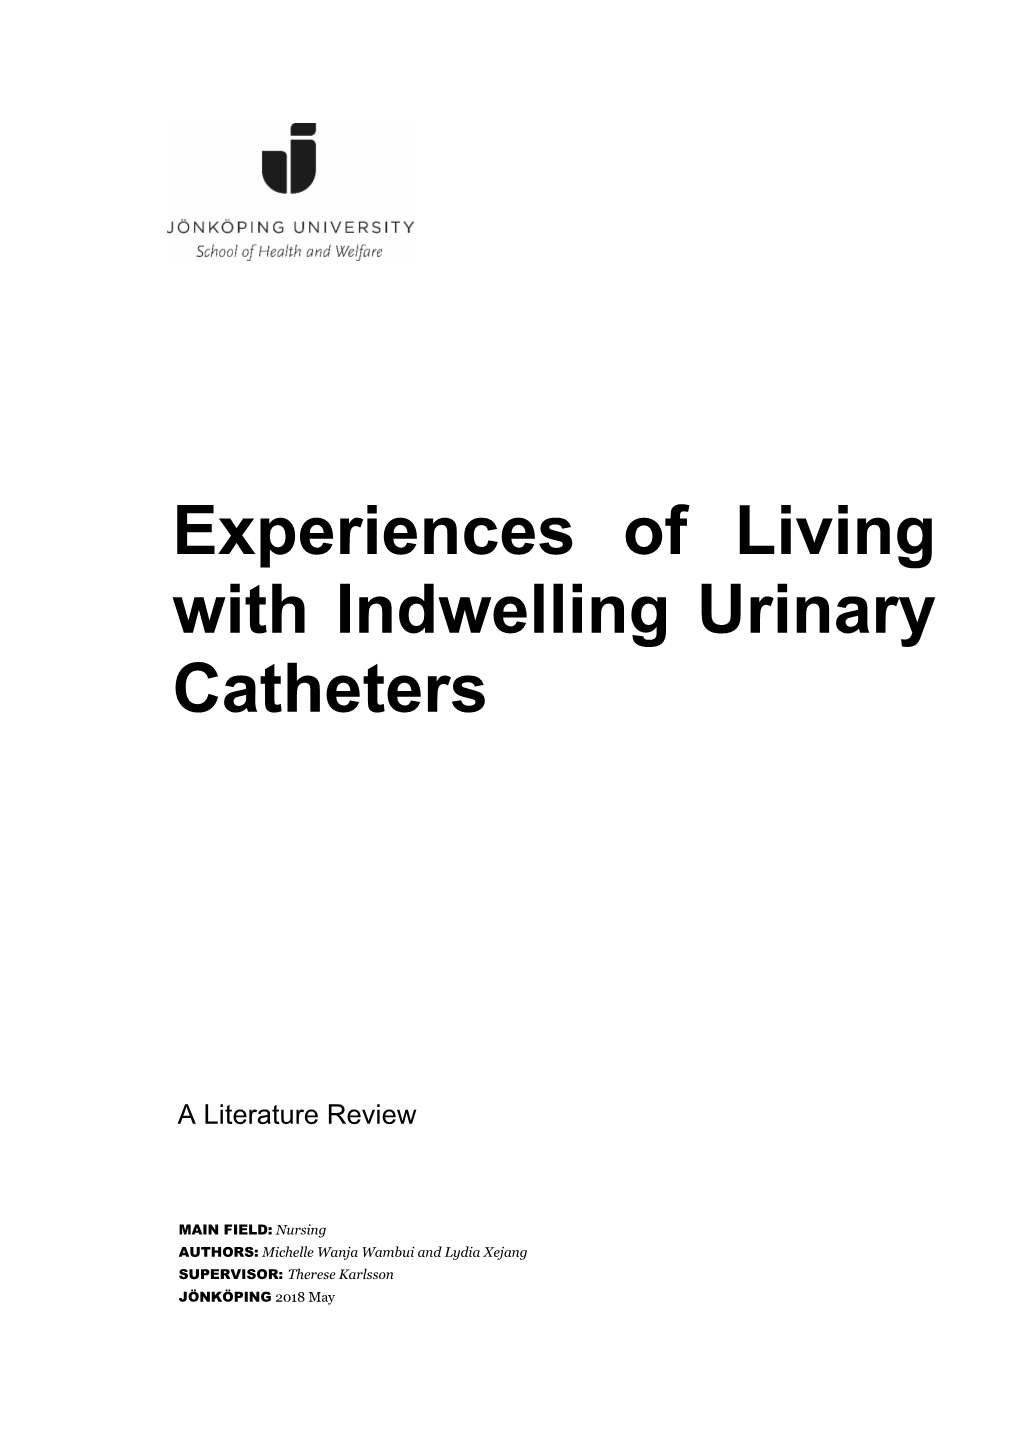 Experiences of Living with Indwelling Urinary Catheters